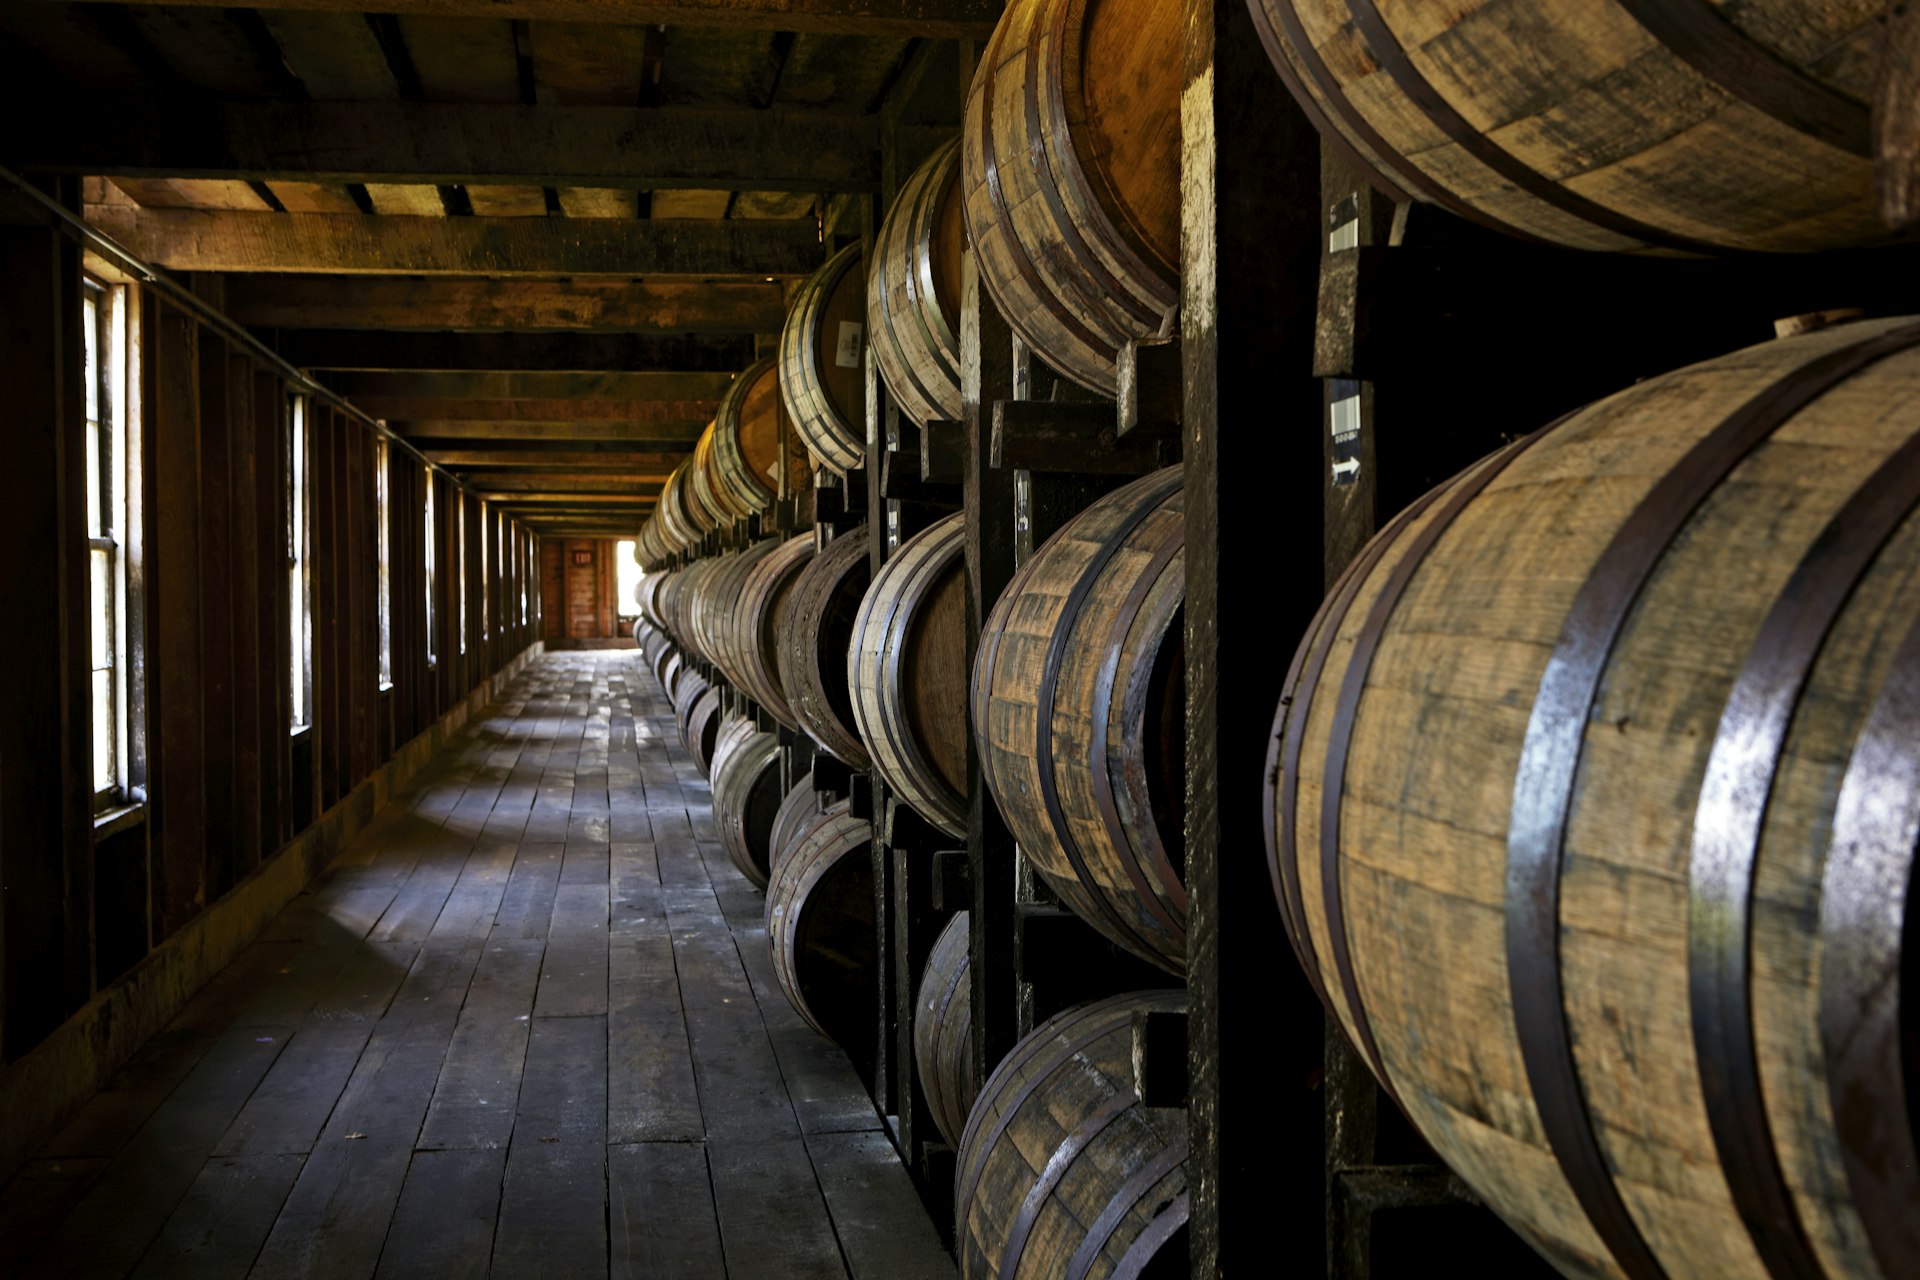 Barrels of bourbon whiskey in a rick house (storage barn) at Heaven Hill Distillery, Bardstown